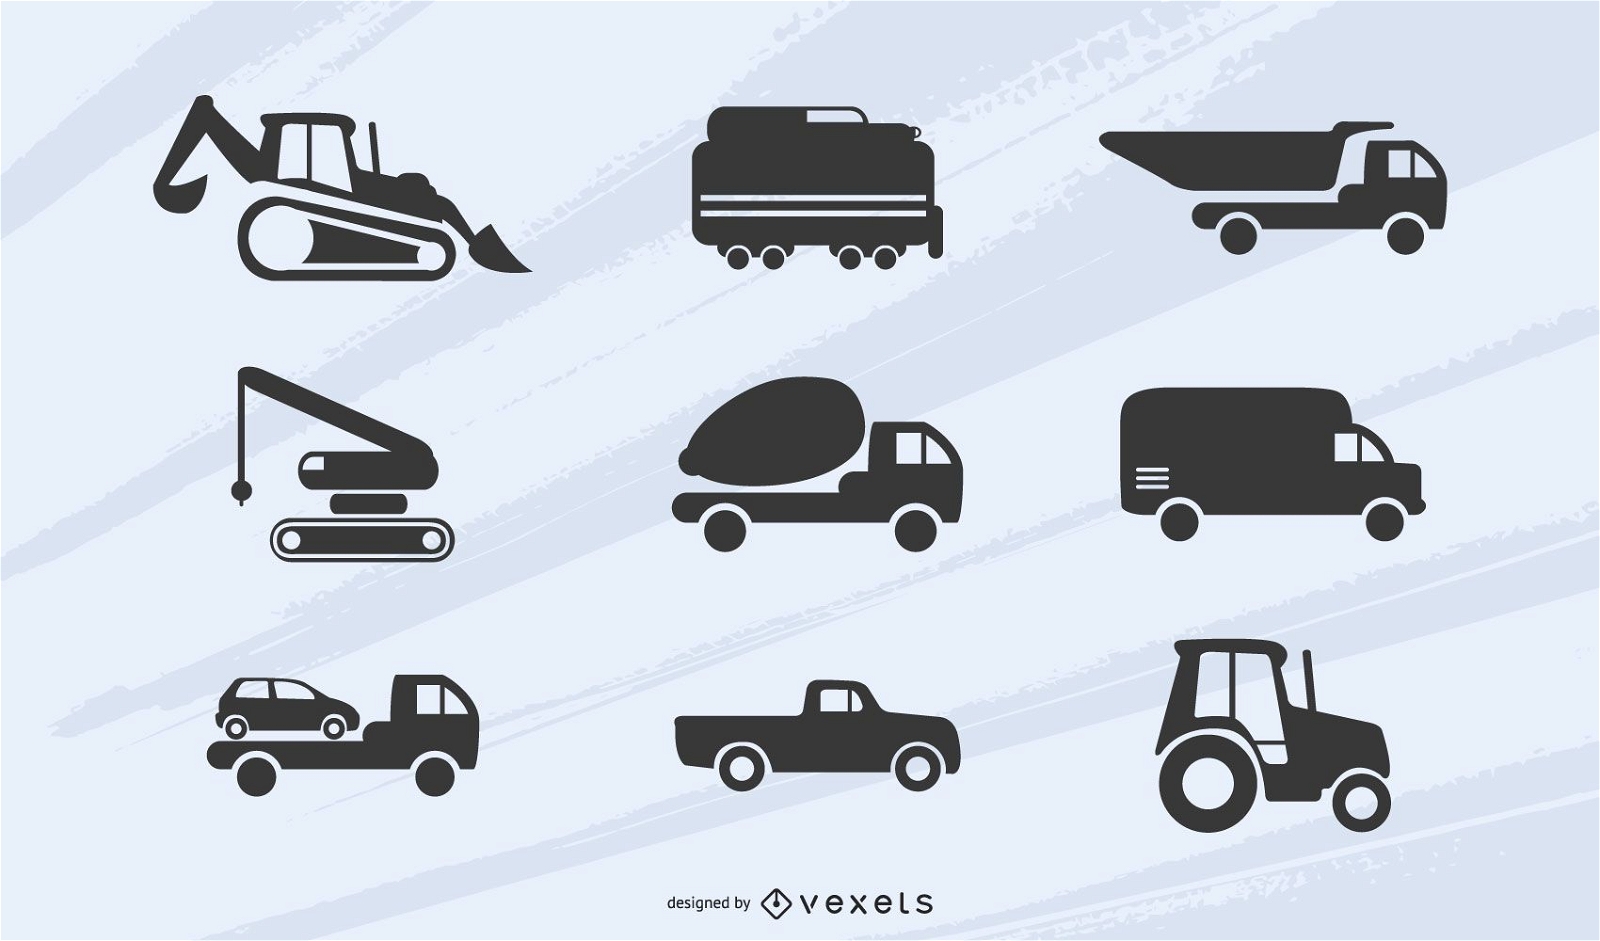 Construction and transportation vehicles silhouettes